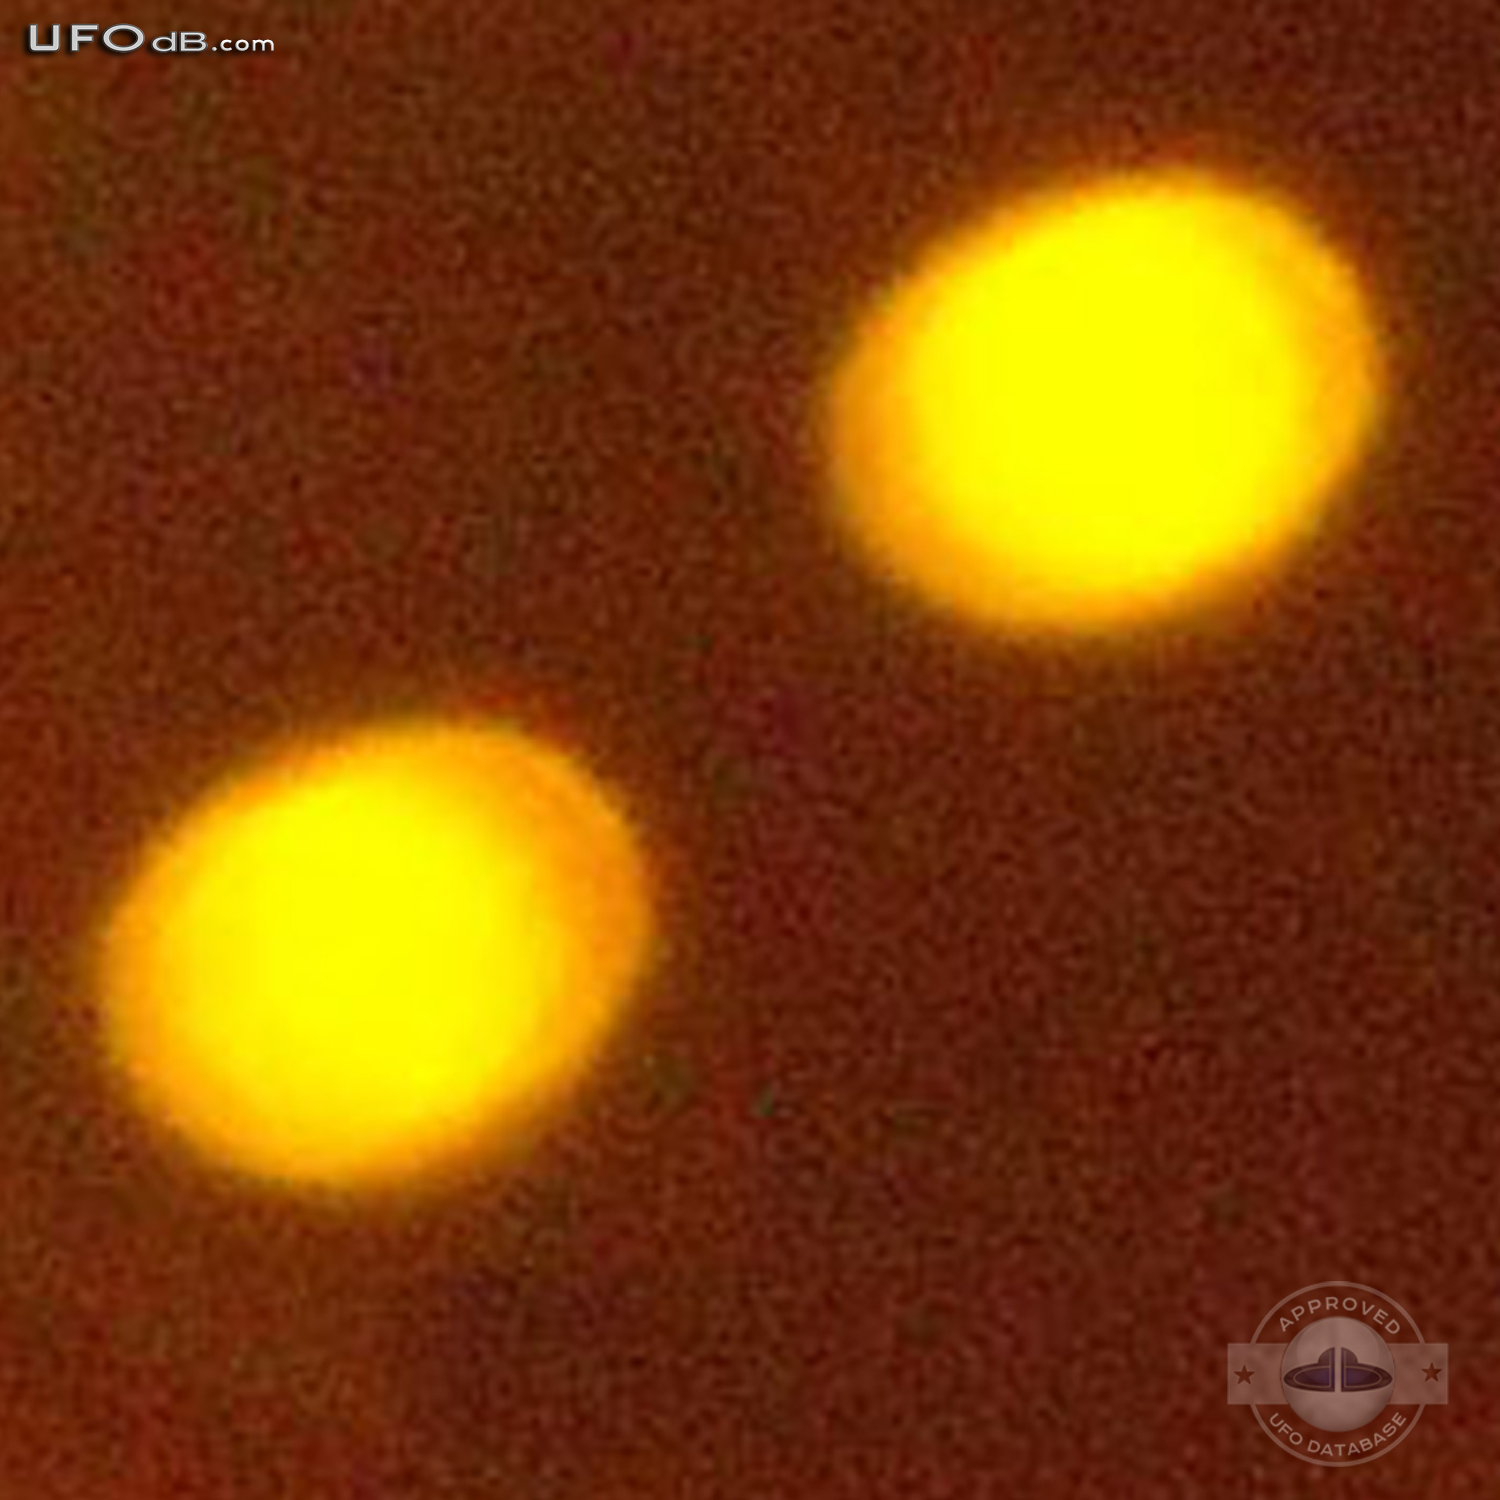 Pulsating Orange UFOs near Fort Carson Army Base | USA | May 12 2011 UFO Picture #310-4